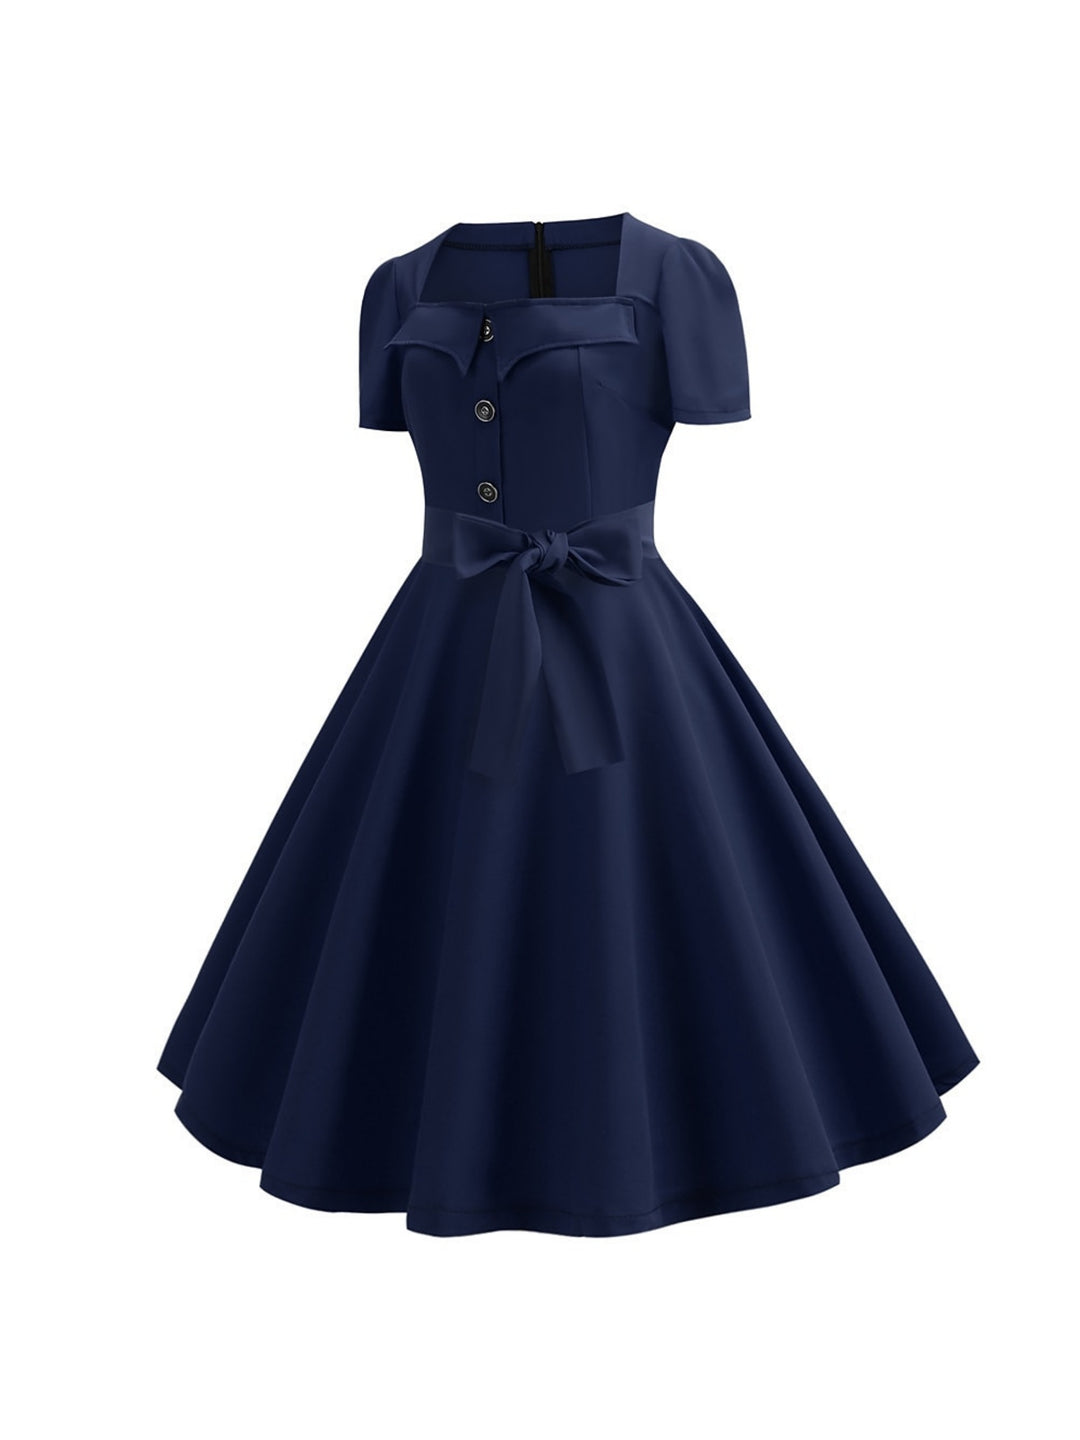 A-Line/Princess Scoop Short Sleeves Tea-Length Vintage Dress With Knotbow